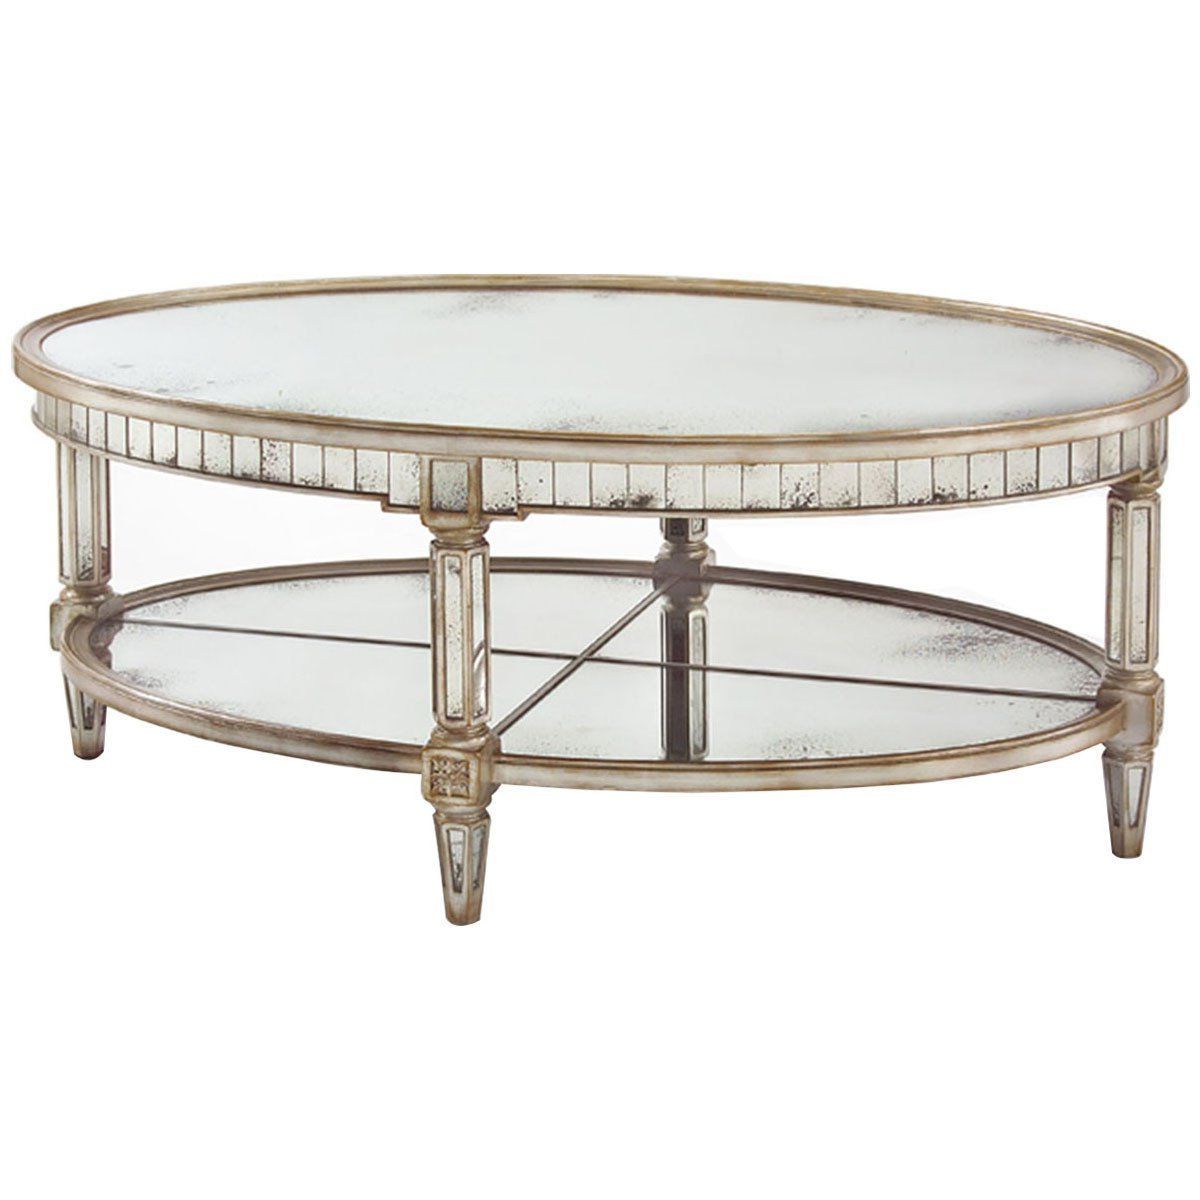 Widely Used Antique Silver Metal Coffee Tables Intended For John Richard Parisian Silver Keswick Oval Cocktail Table (View 9 of 20)